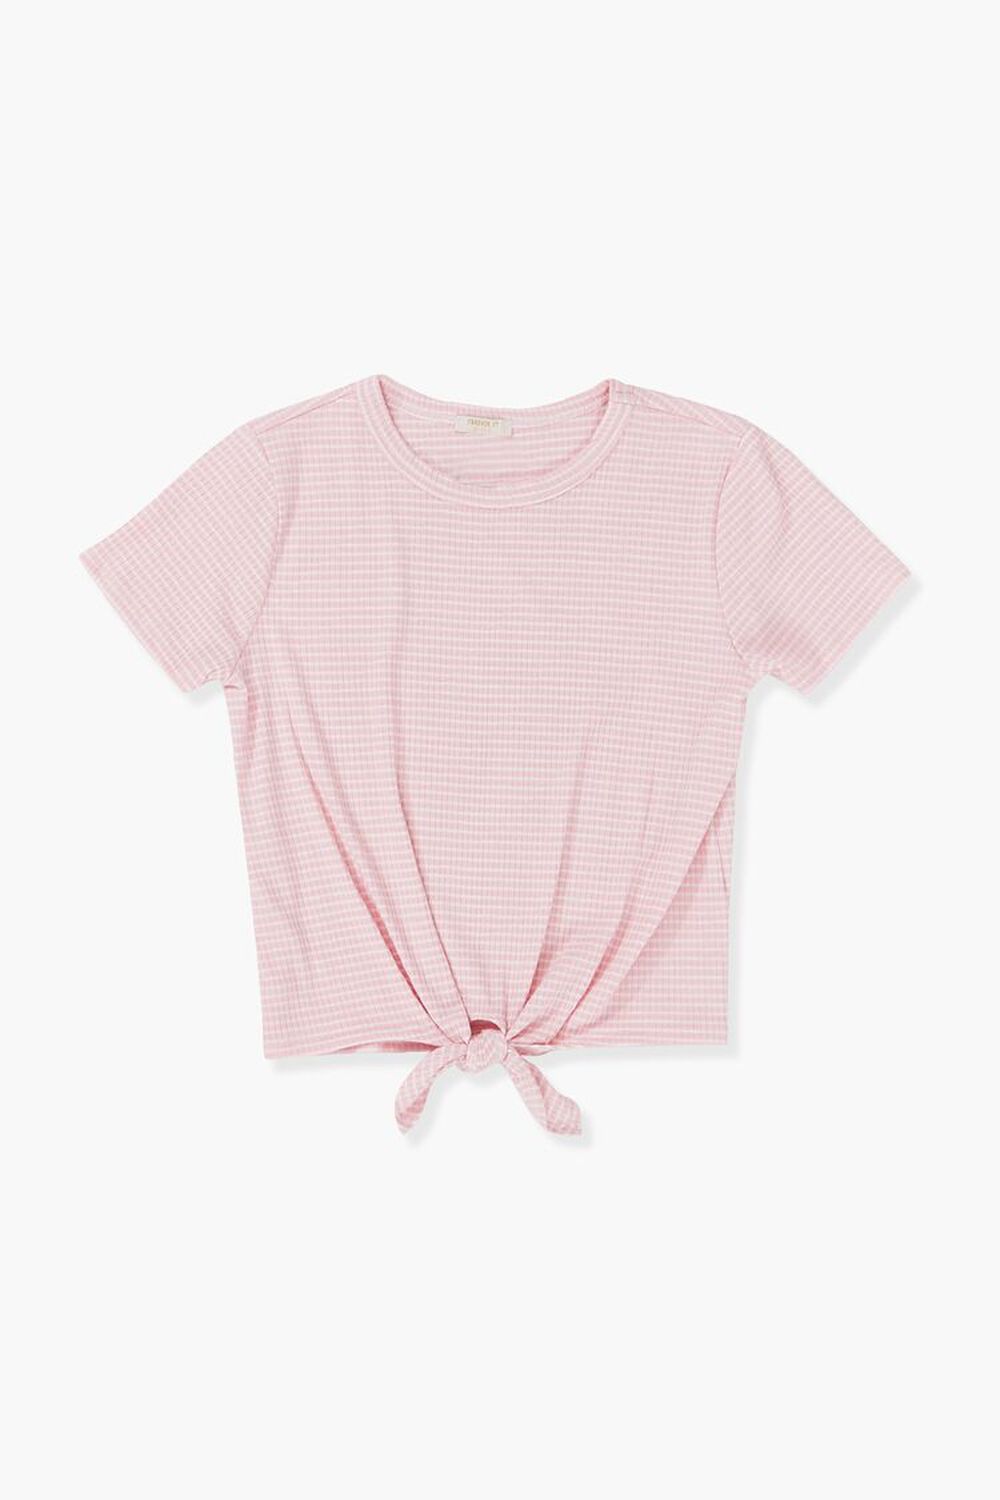 PINK/WHITE Girls Striped Knotted Tee (Kids), image 1